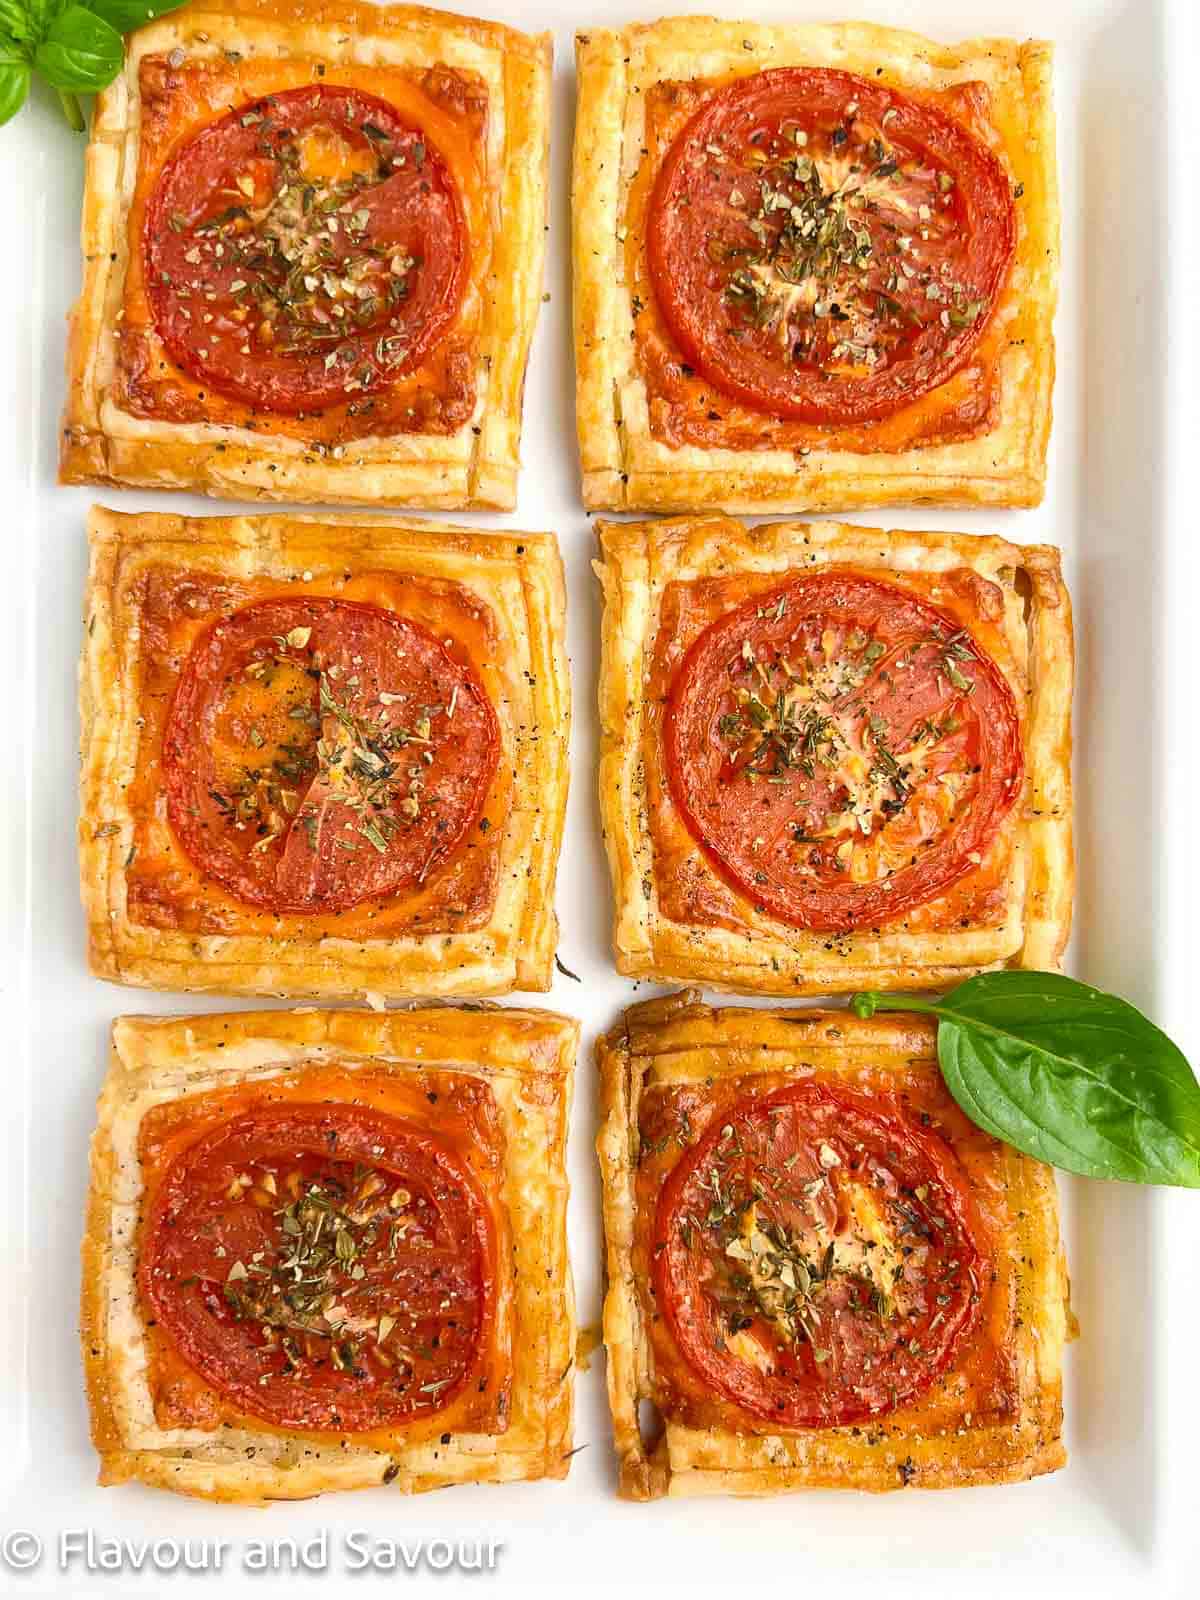 Overhead view of 6 puff pastry tomato tarts on a white serving plate.